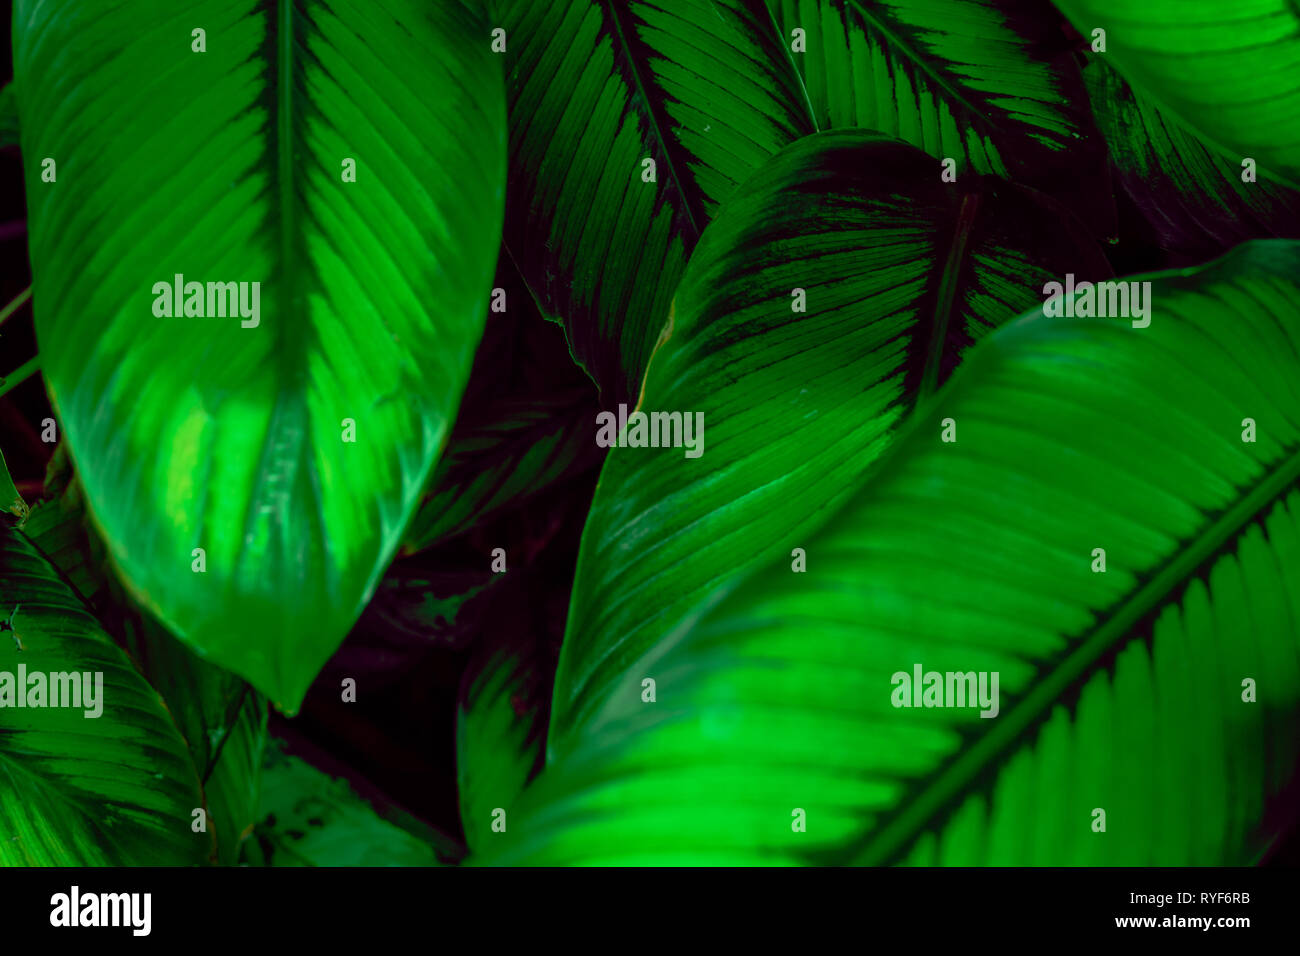 Tropical plant leaves moody background with copy space Stock Photo